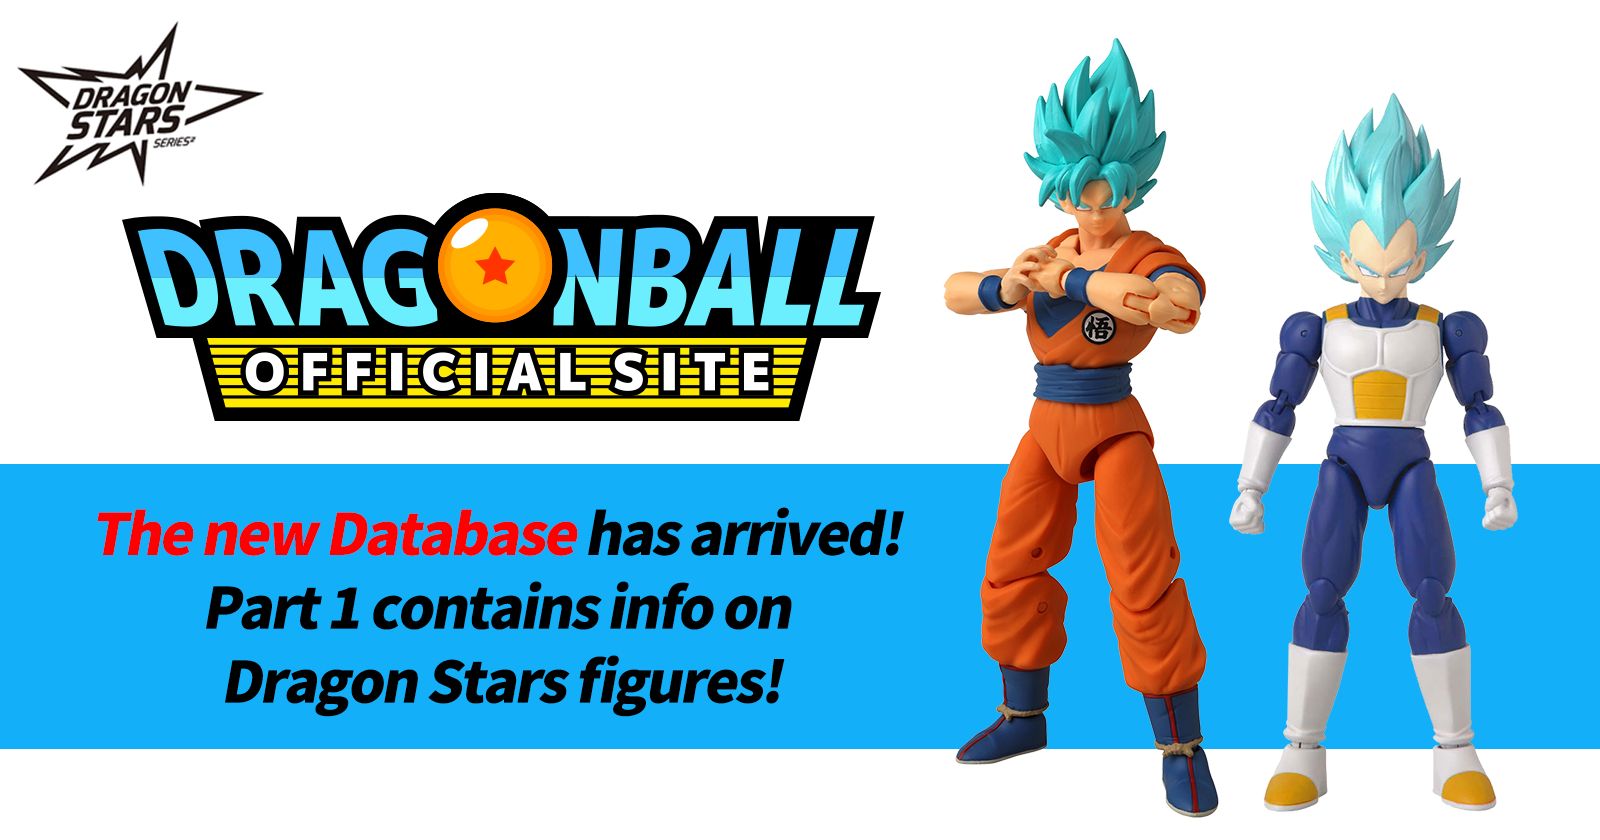 The new Database has arrived! Part 1 contains info on Dragon Stars figures!